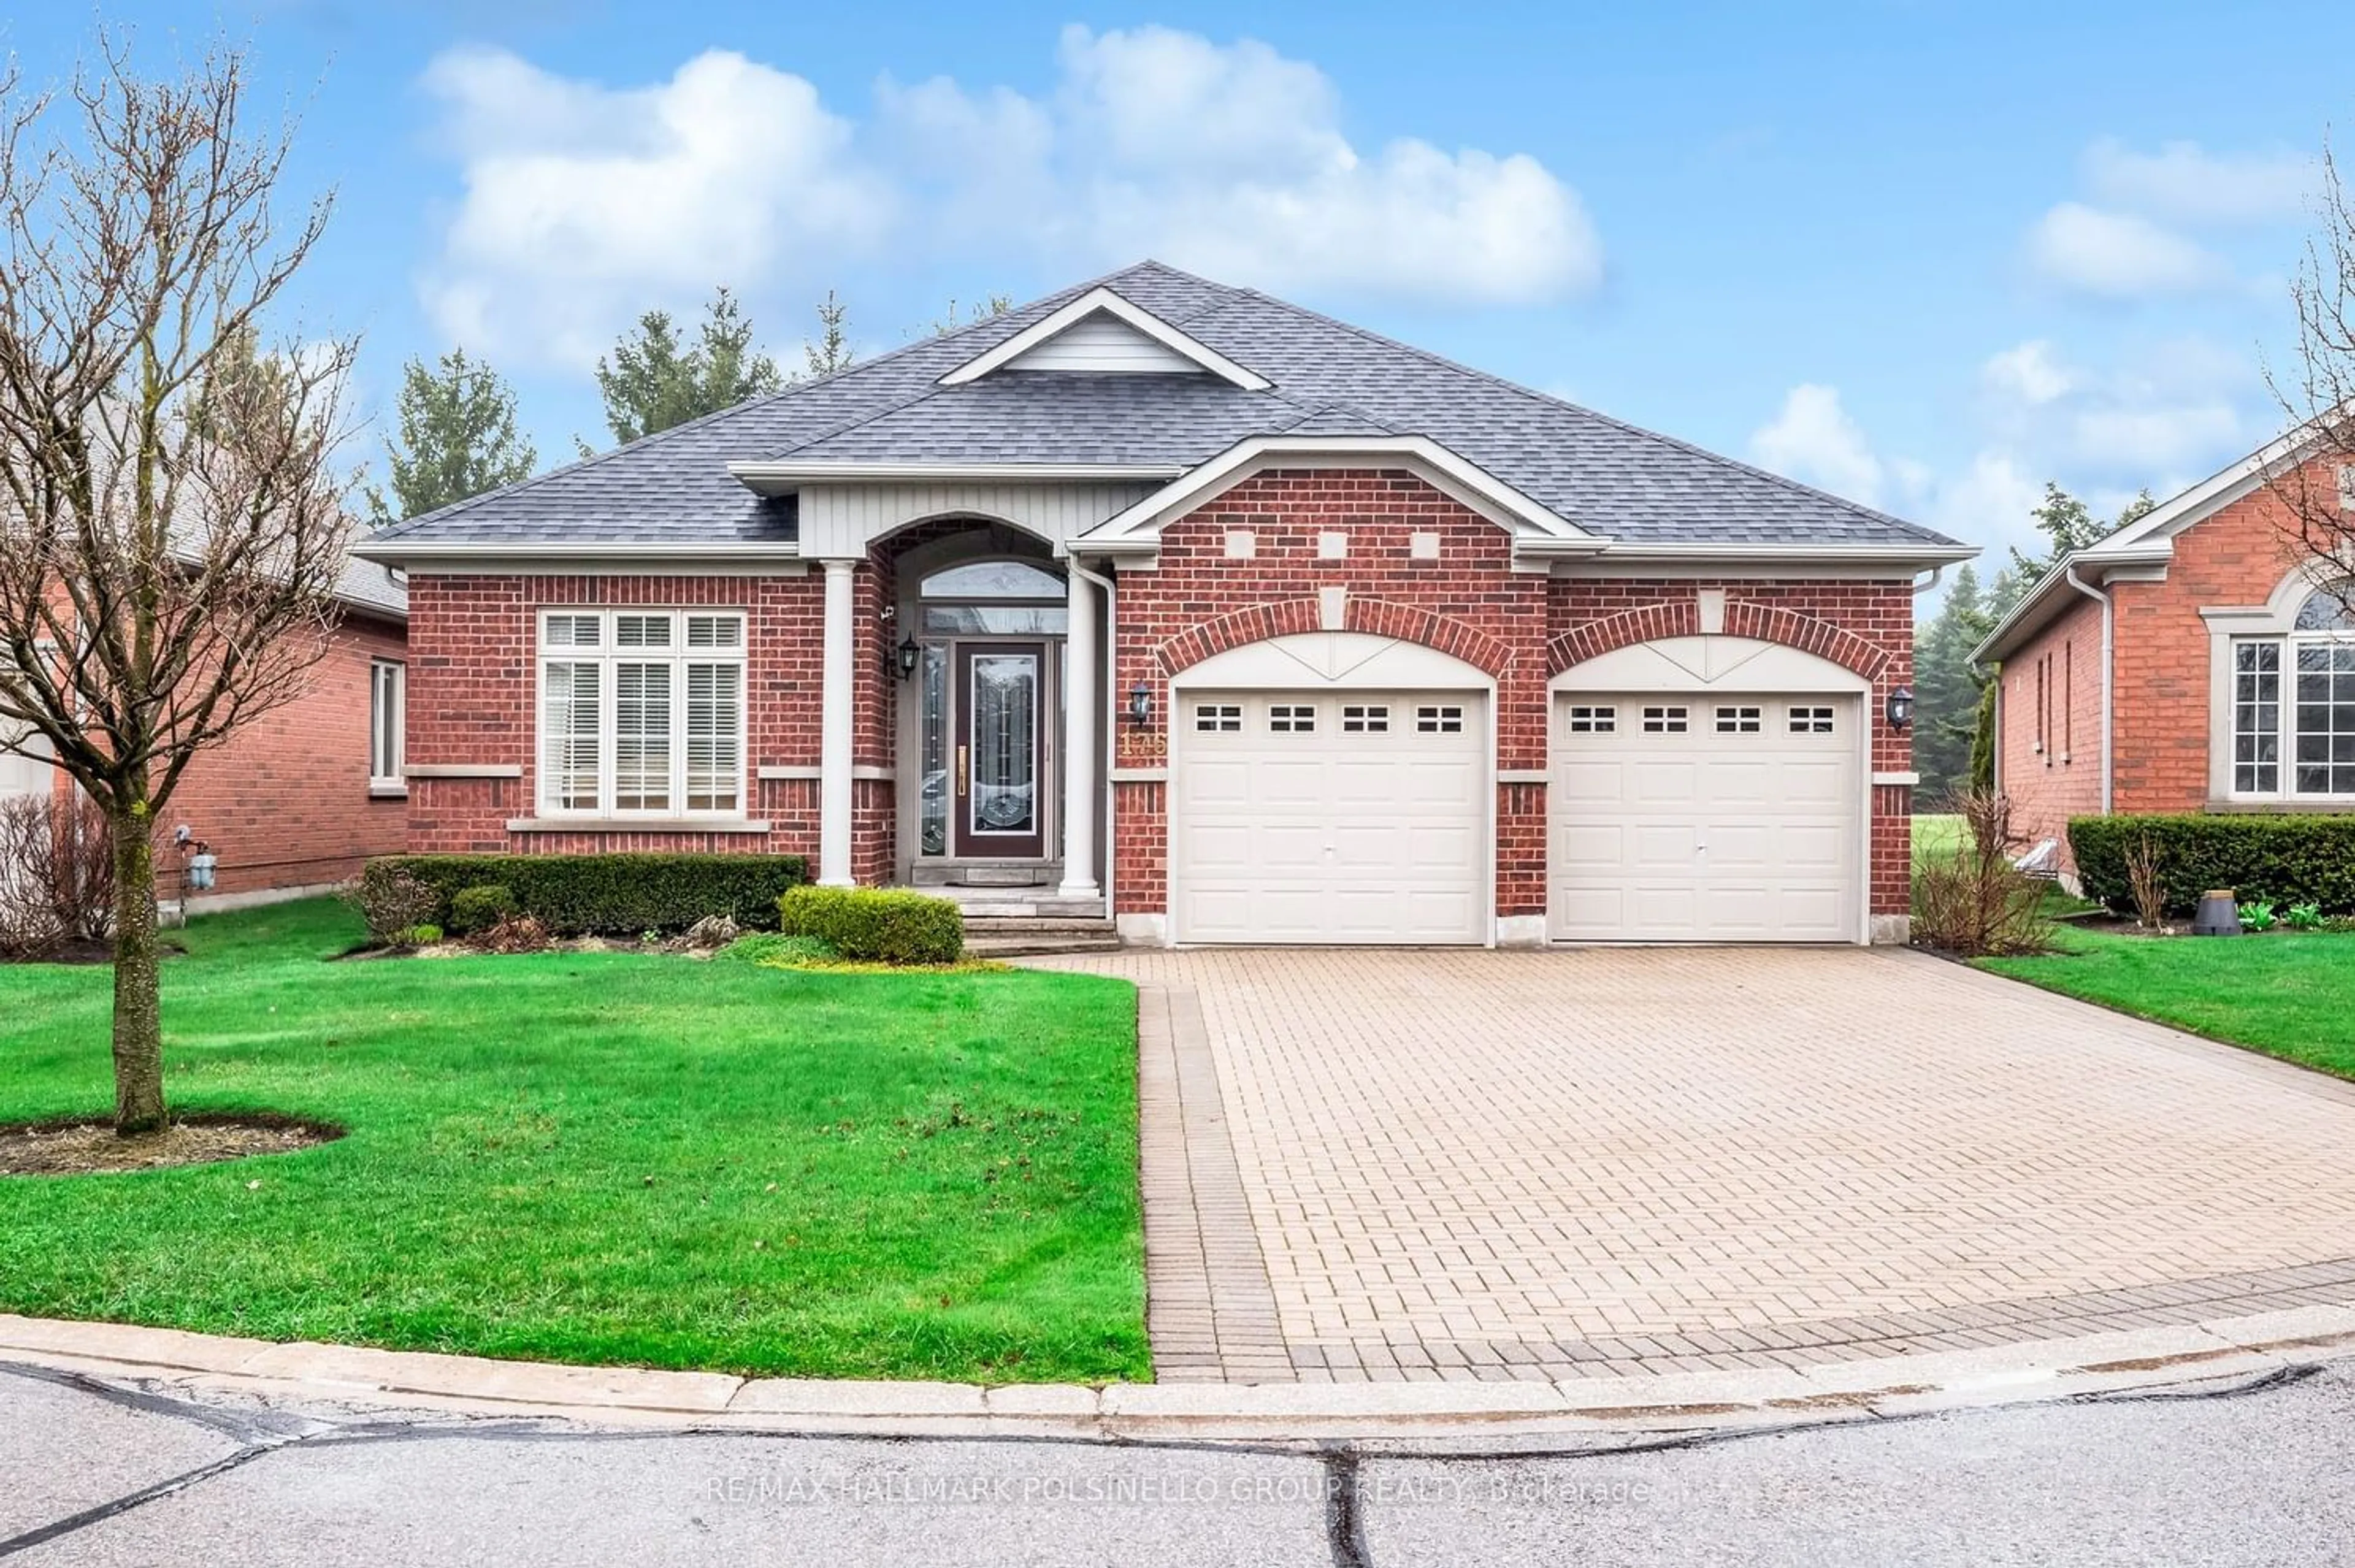 Home with brick exterior material for 176 Bobby Locke Lane, Whitchurch-Stouffville Ontario L4A 1R3